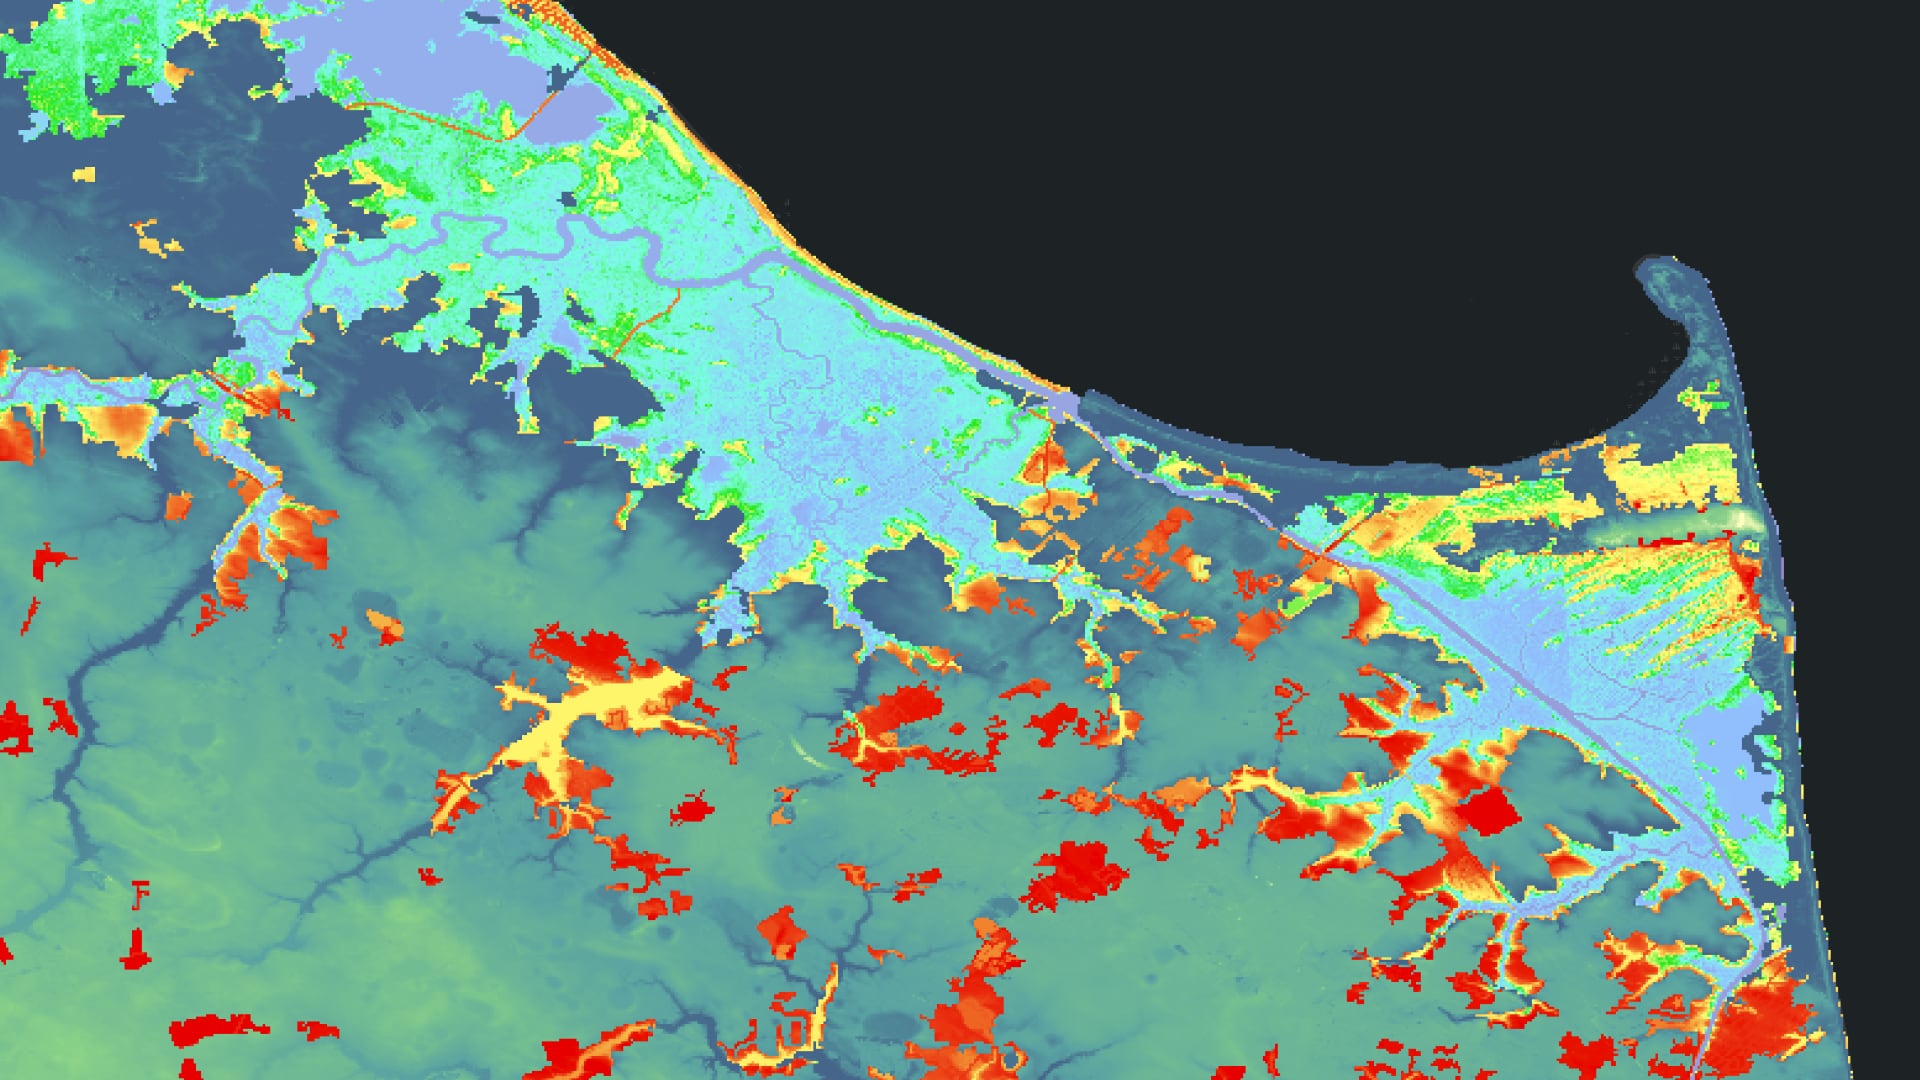 Likelihood of transition from wetland to other land cover by 2050, based on wetland loss patterns from 2010 Landsat 5 TM and 2020 Landsat 8 OLI imagery. Areas with highest likelihood of loss on the Eastern shore of Delaware are shown in red, with those likely to persist in light blue. A LiDAR Digital Elevation Model (2013-2014) indicates low elevation in dark blue. Predicting wetland trends allows local stakeholders to prioritize management of wetland areas.Keywords: Delaware, Landsat, wetlands, marsh